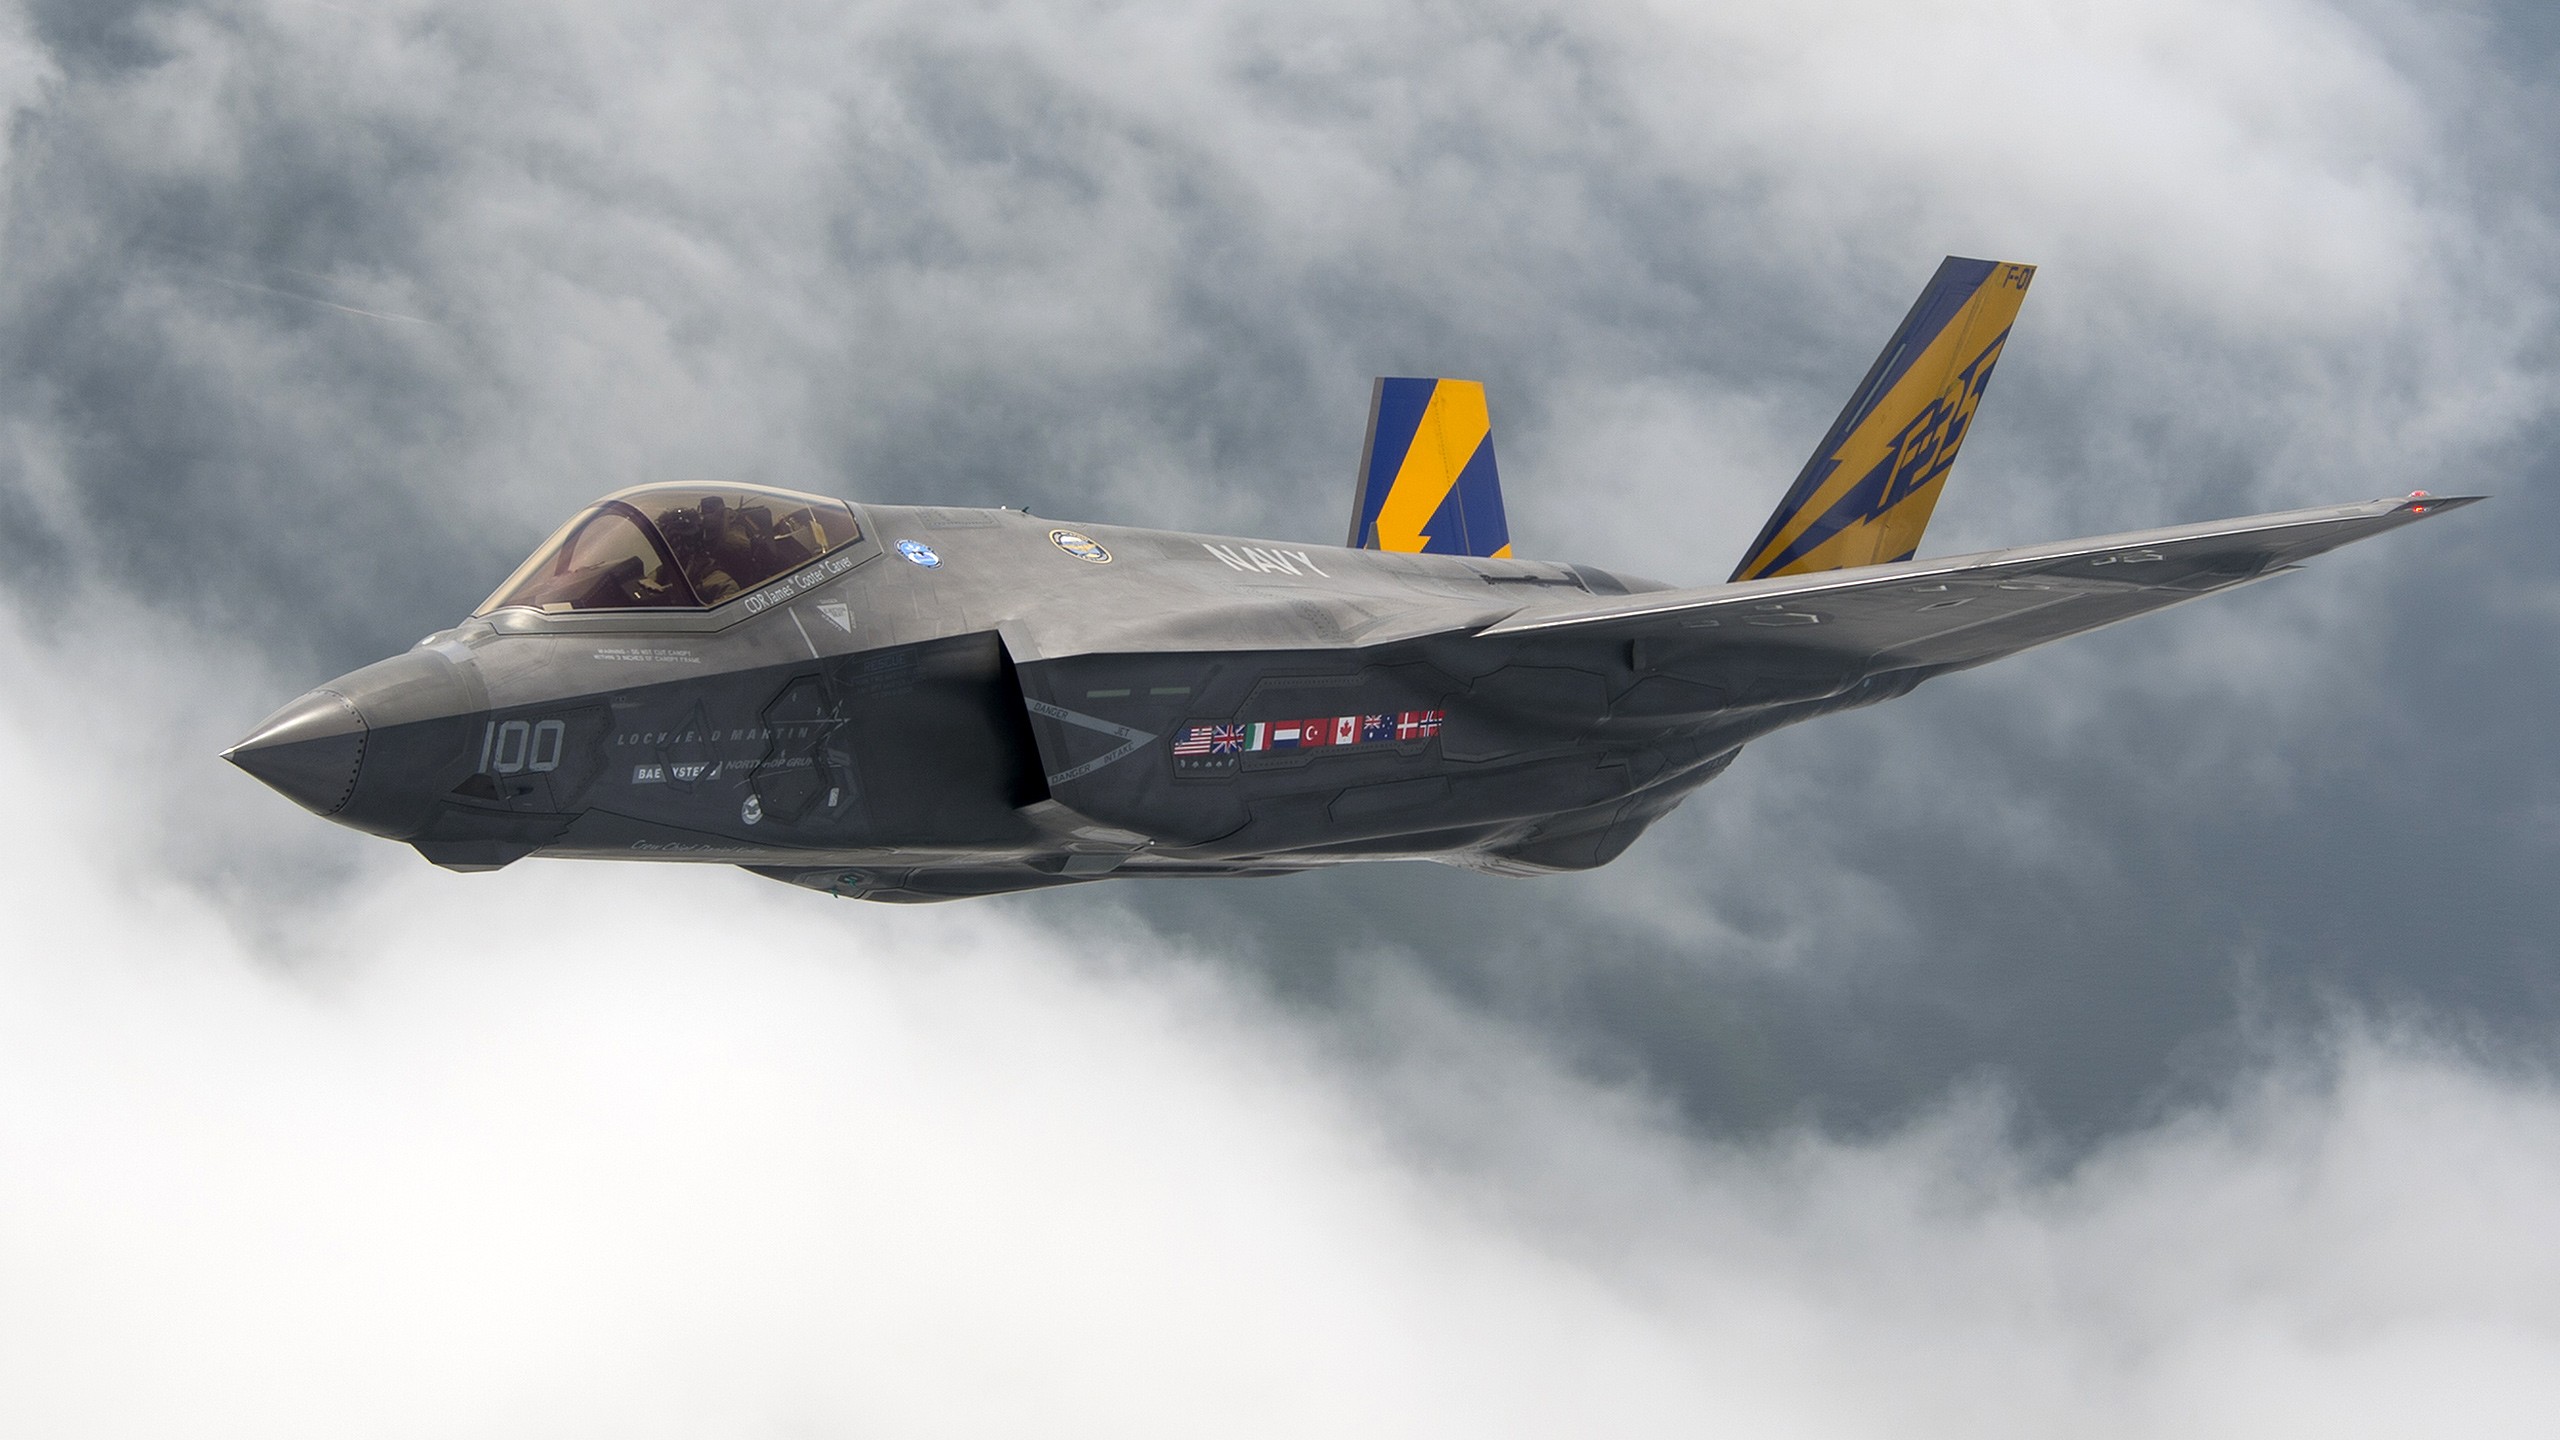 General 2560x1440 Tom Clancy's Ghost Recon Lockheed Martin F-35 Lightning II video games military aircraft vehicle aircraft Lockheed Martin American aircraft